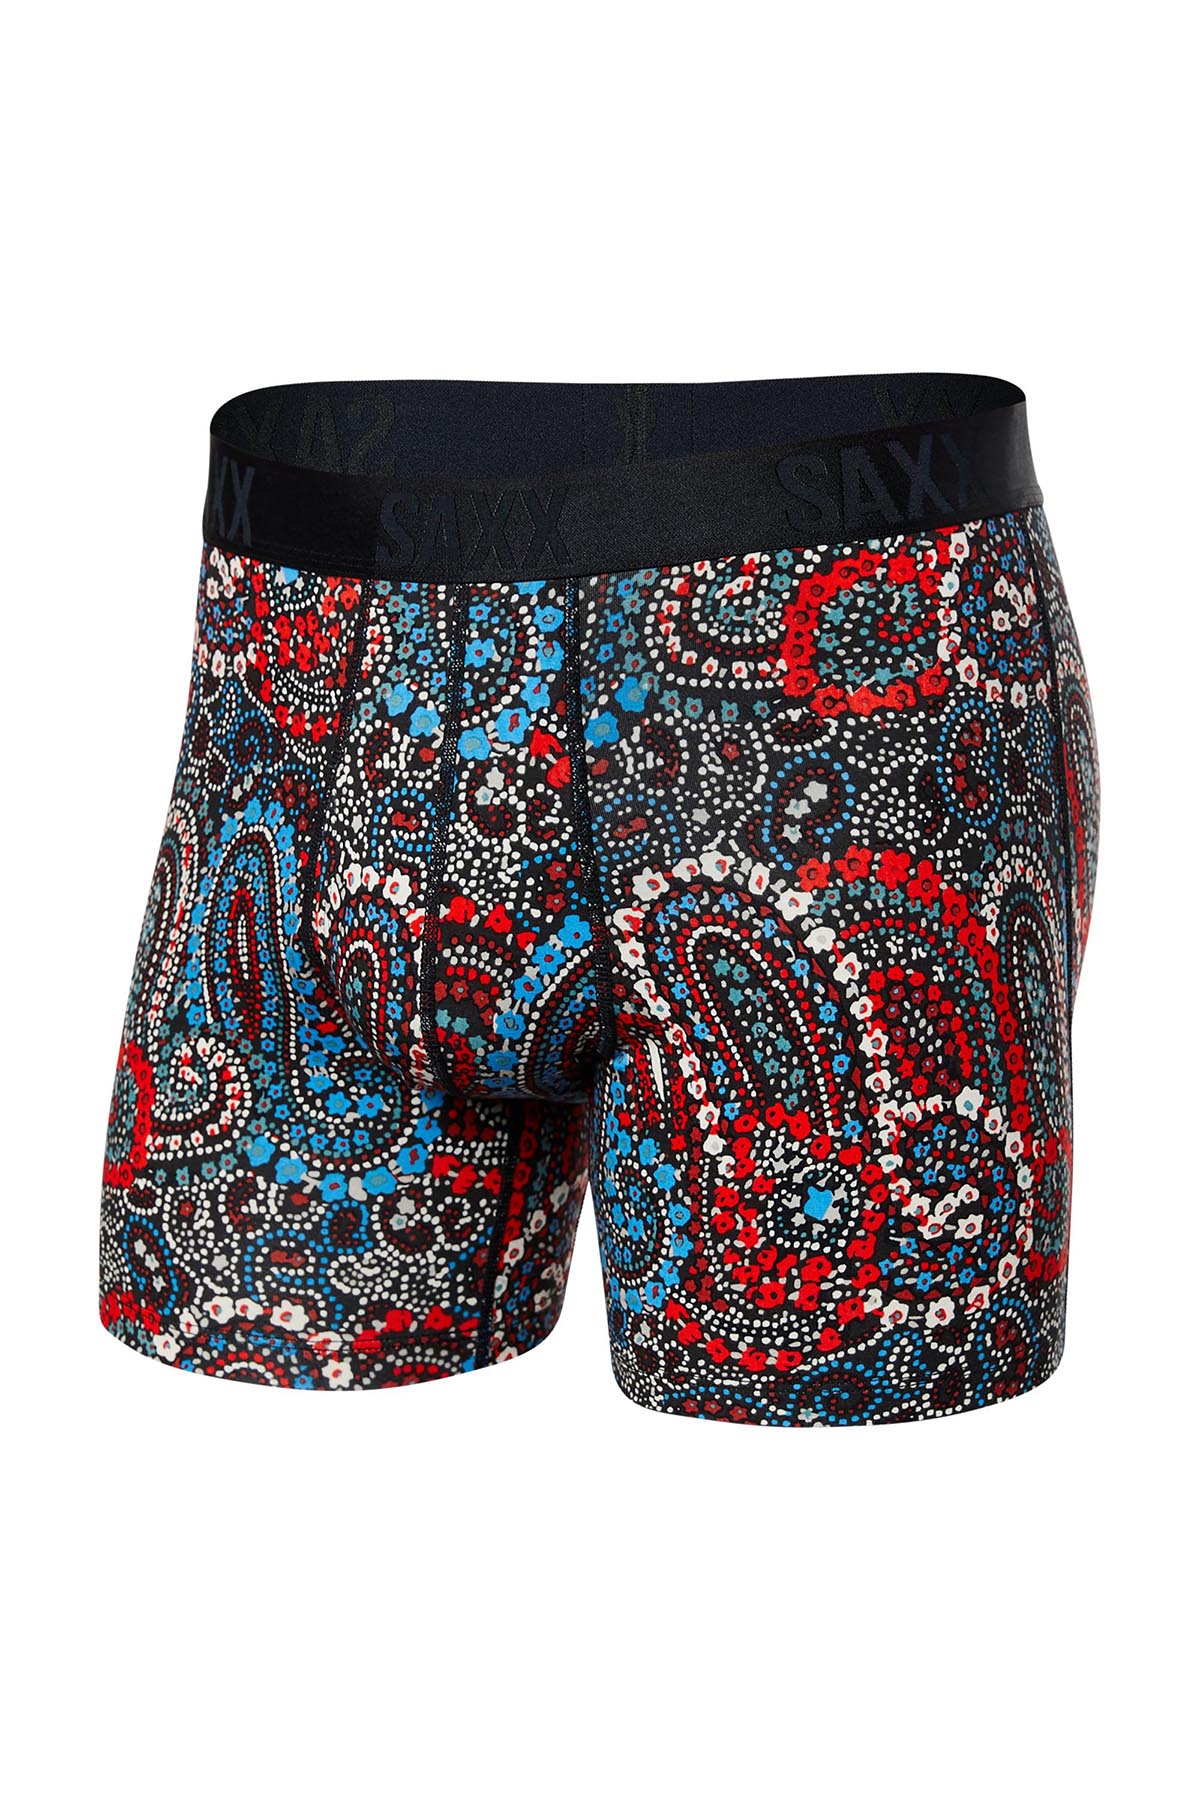 Saxx 22nd Century Silk Boxer Brief, Painted Paisley, SXBB67-PPM, Mens  Boxer Briefs